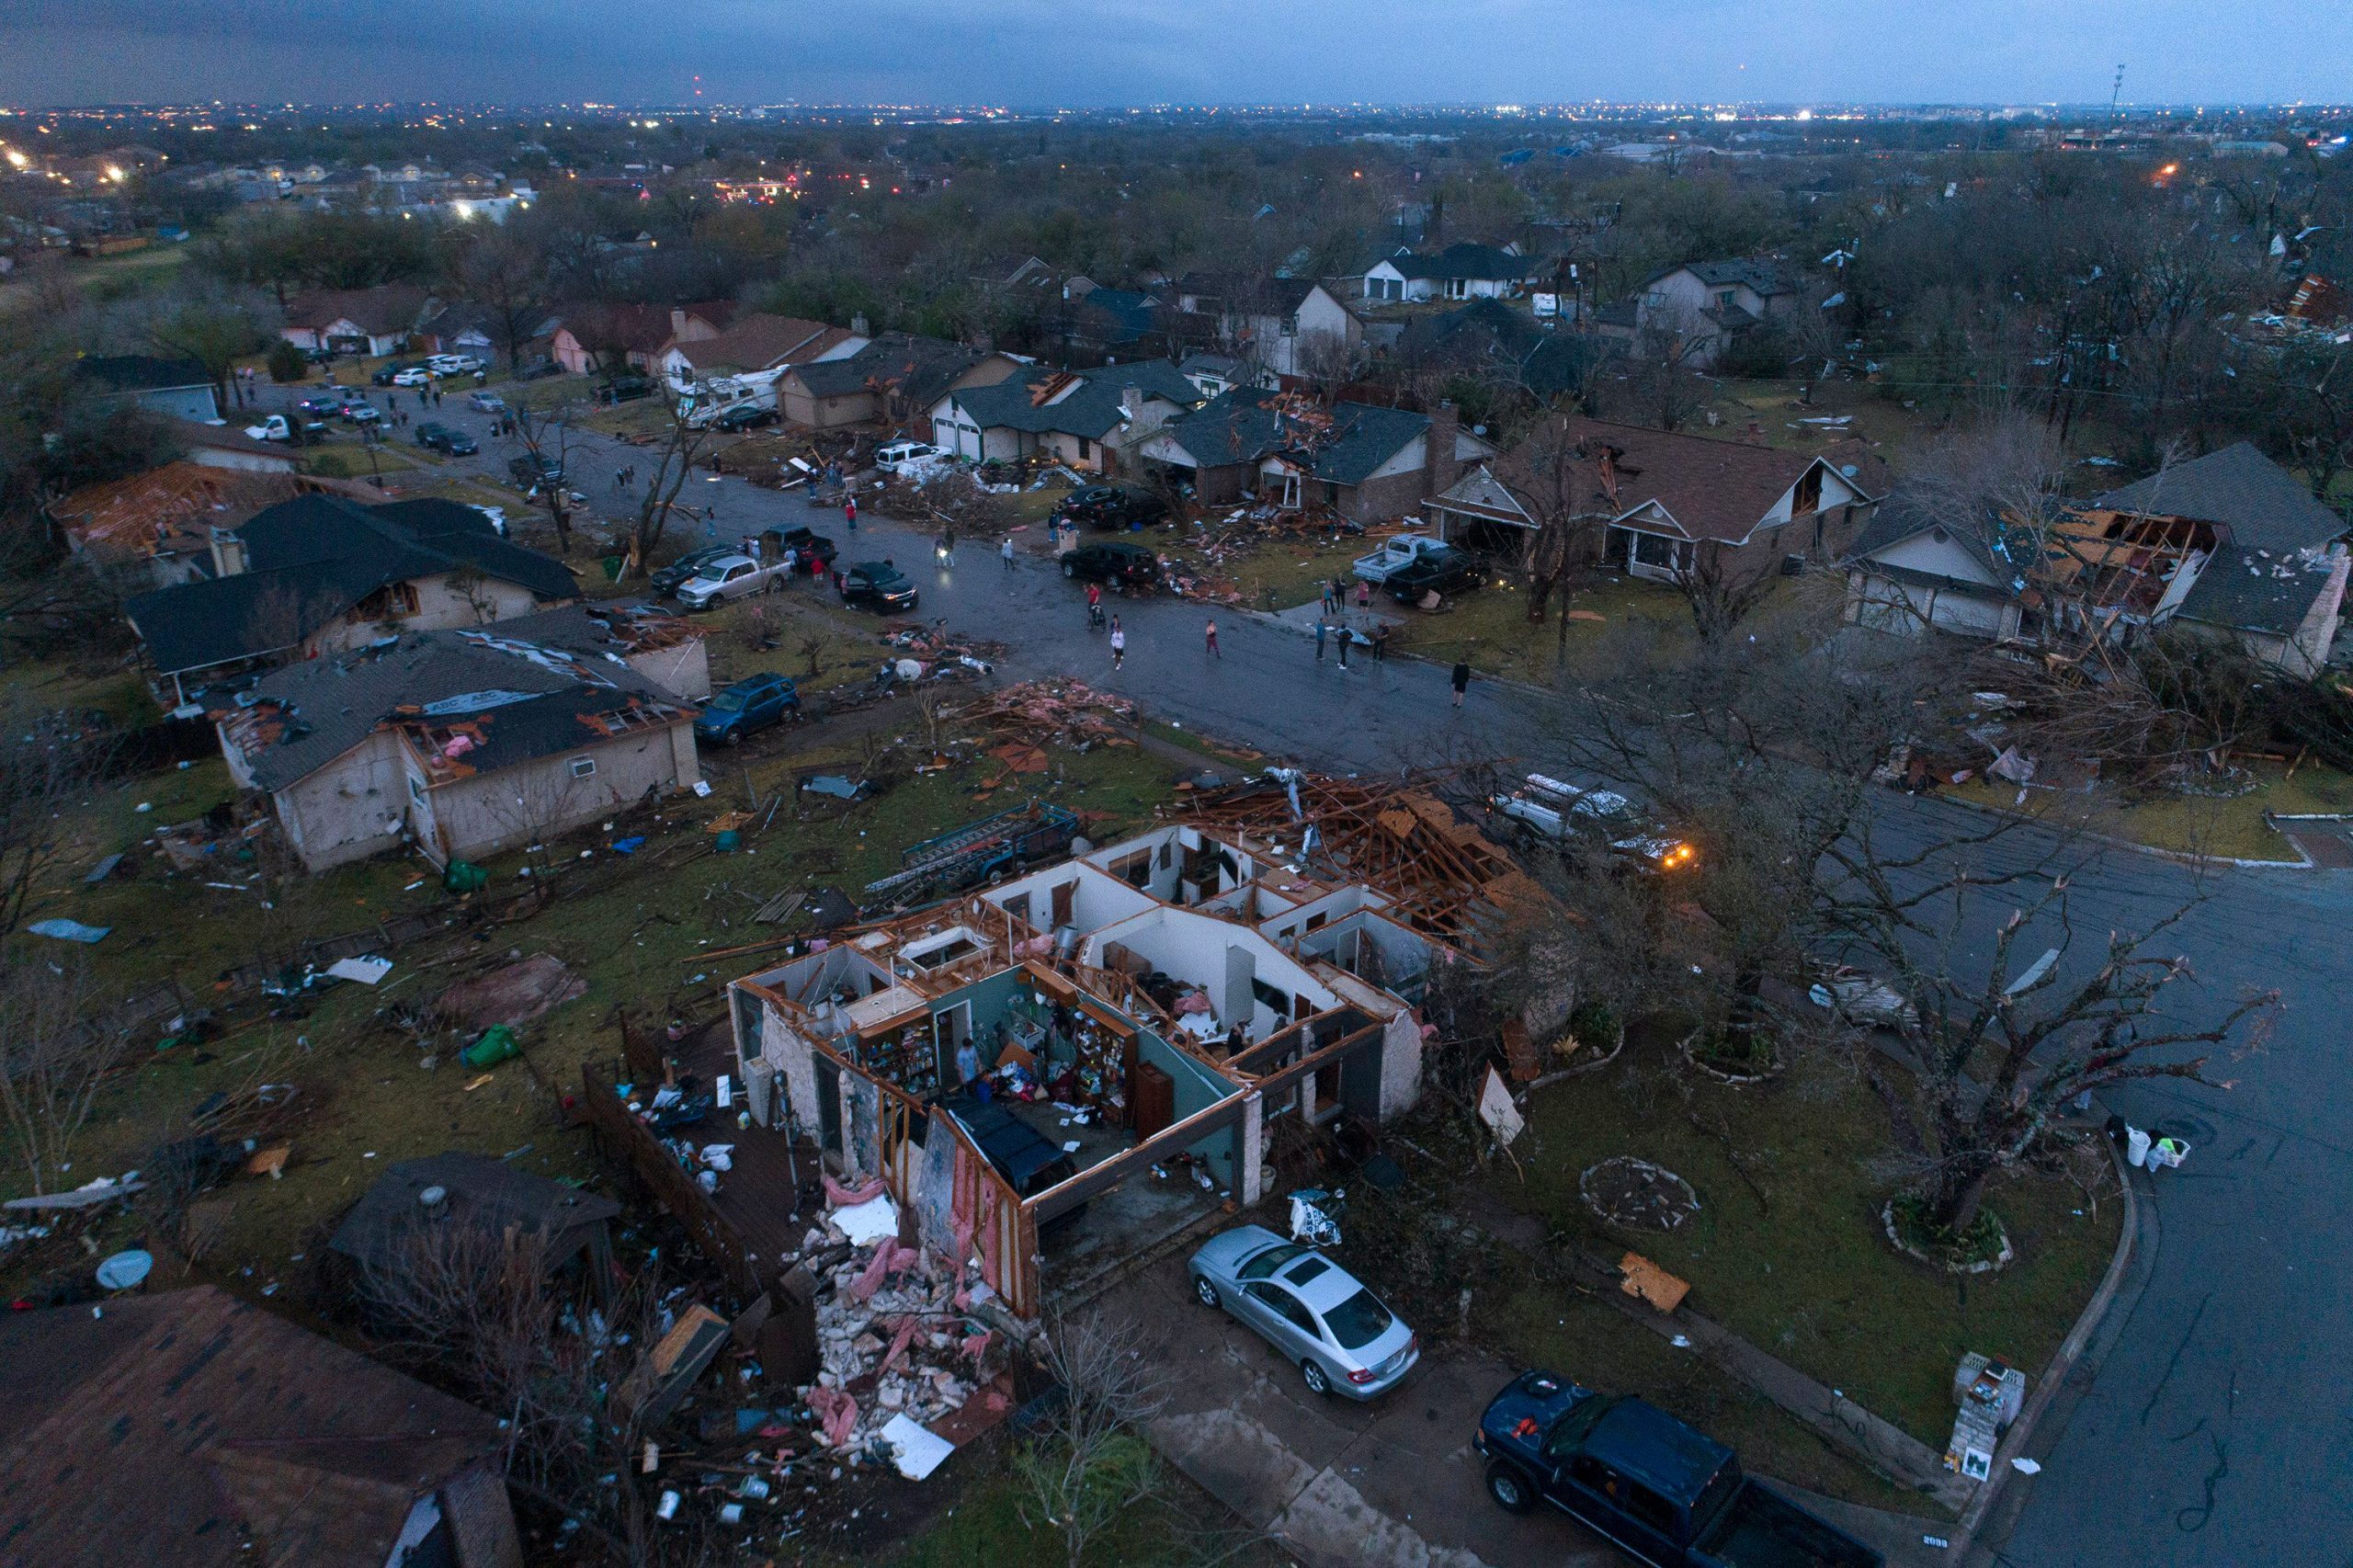 Search and rescue underway in New Orleans after tornado strike